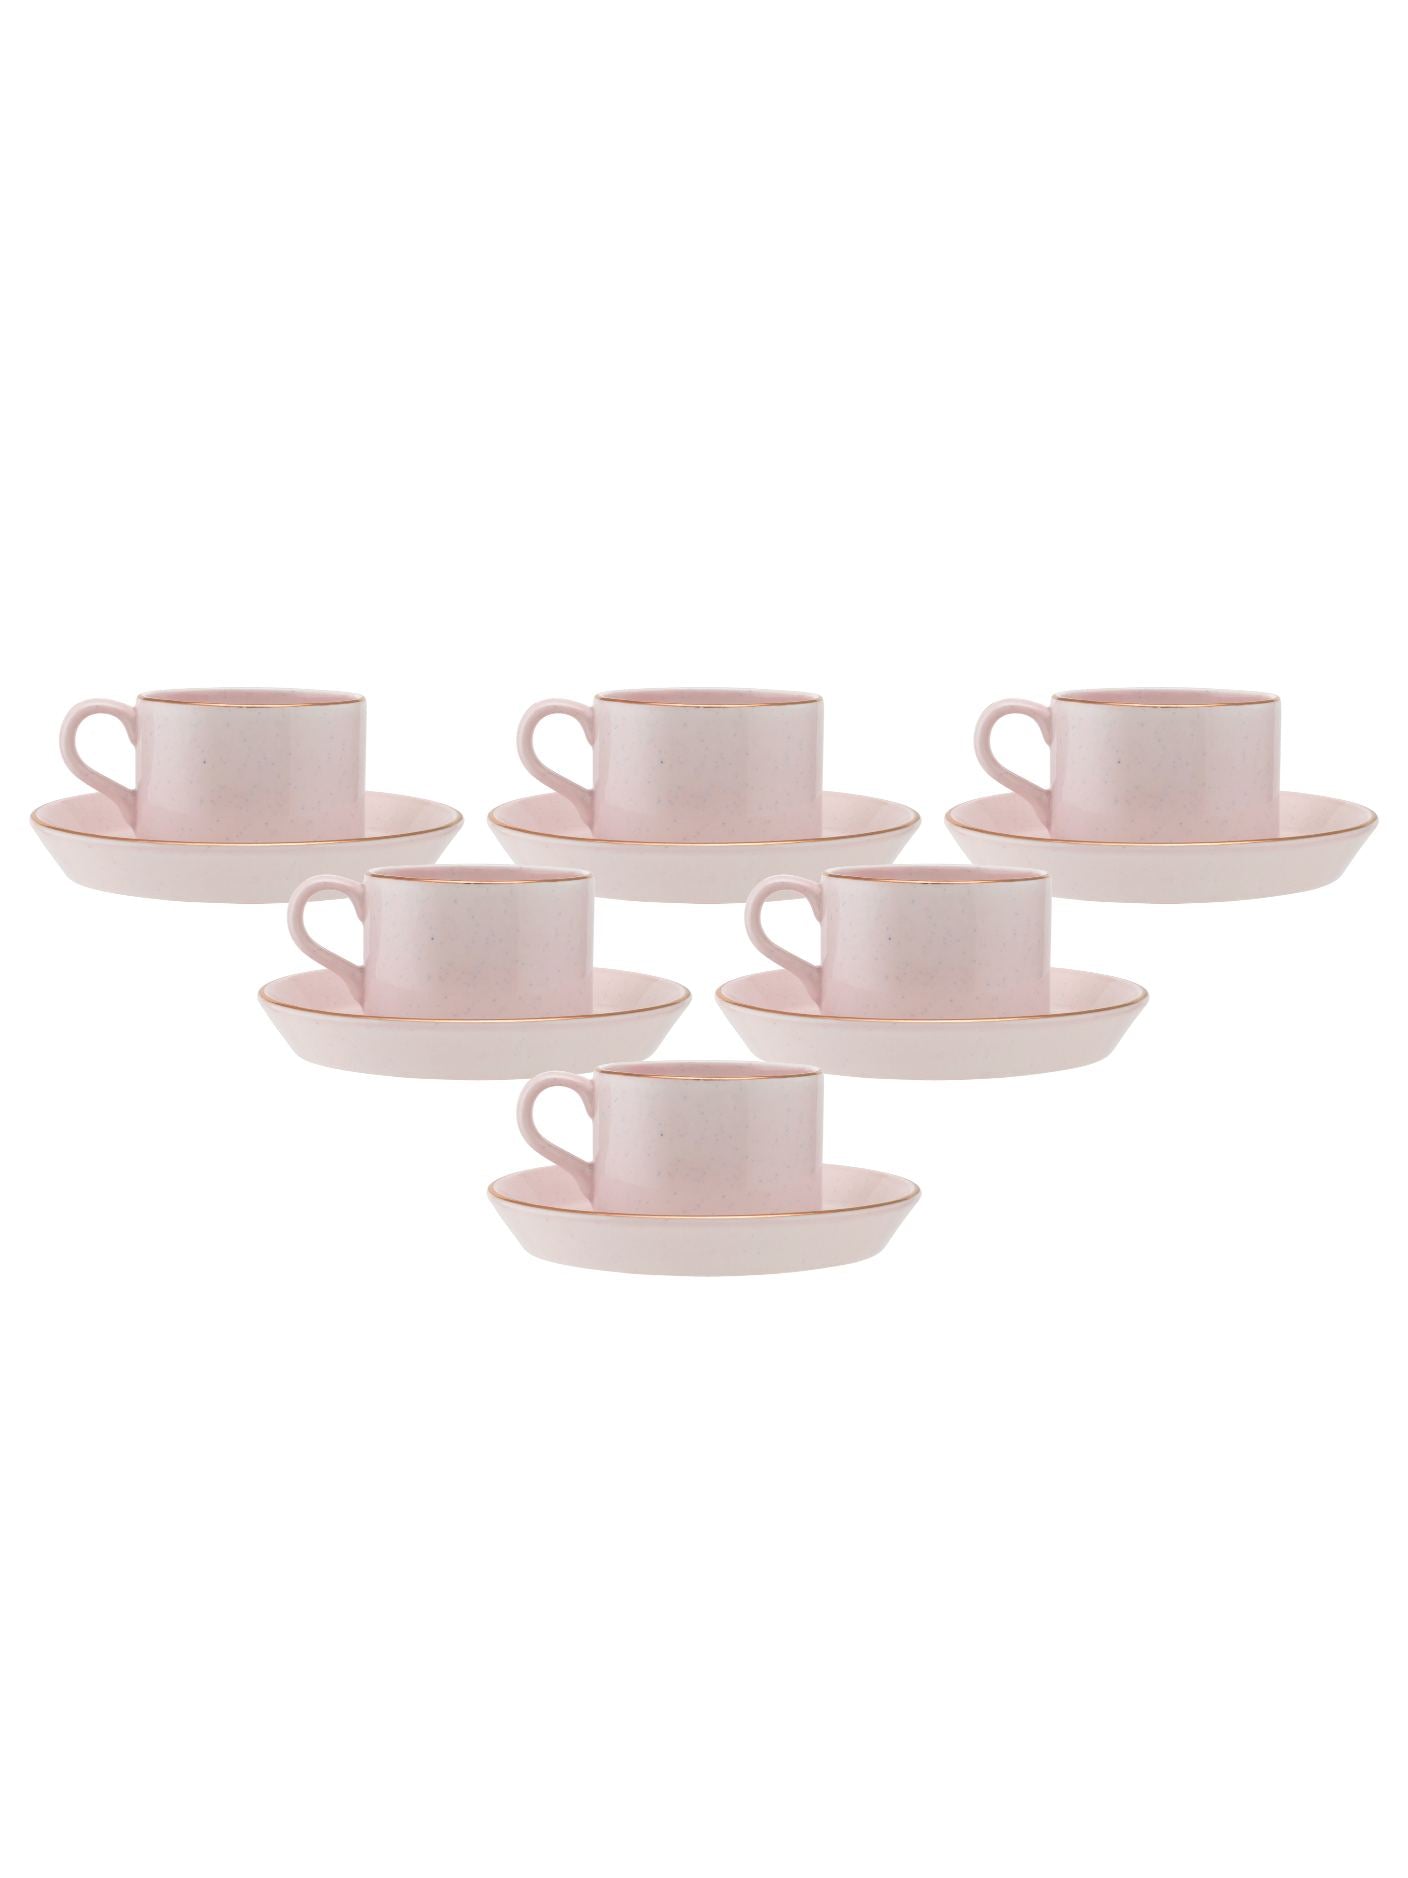 Rio Impression Cup & Saucer, 135ml, Set of 12 (6 Cups + 6 Saucers), Ivory (1101)